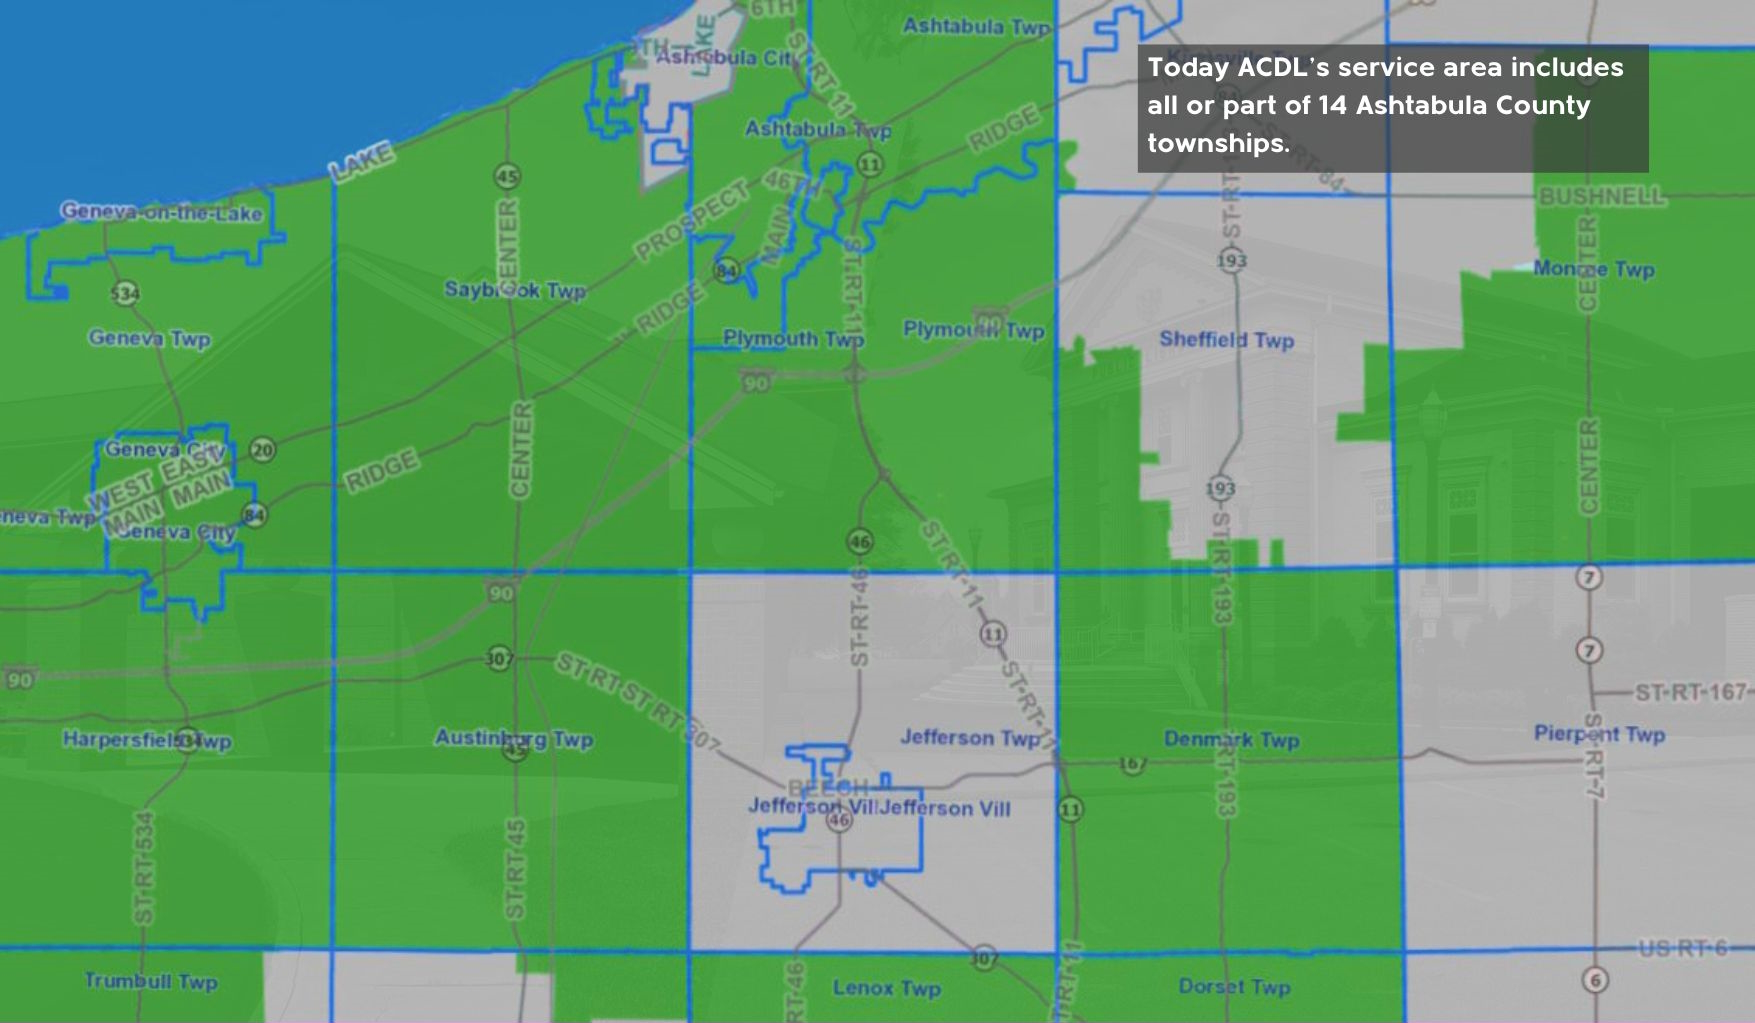 Map showing a portion of ACDL's service area includes all or part of 14 townships.